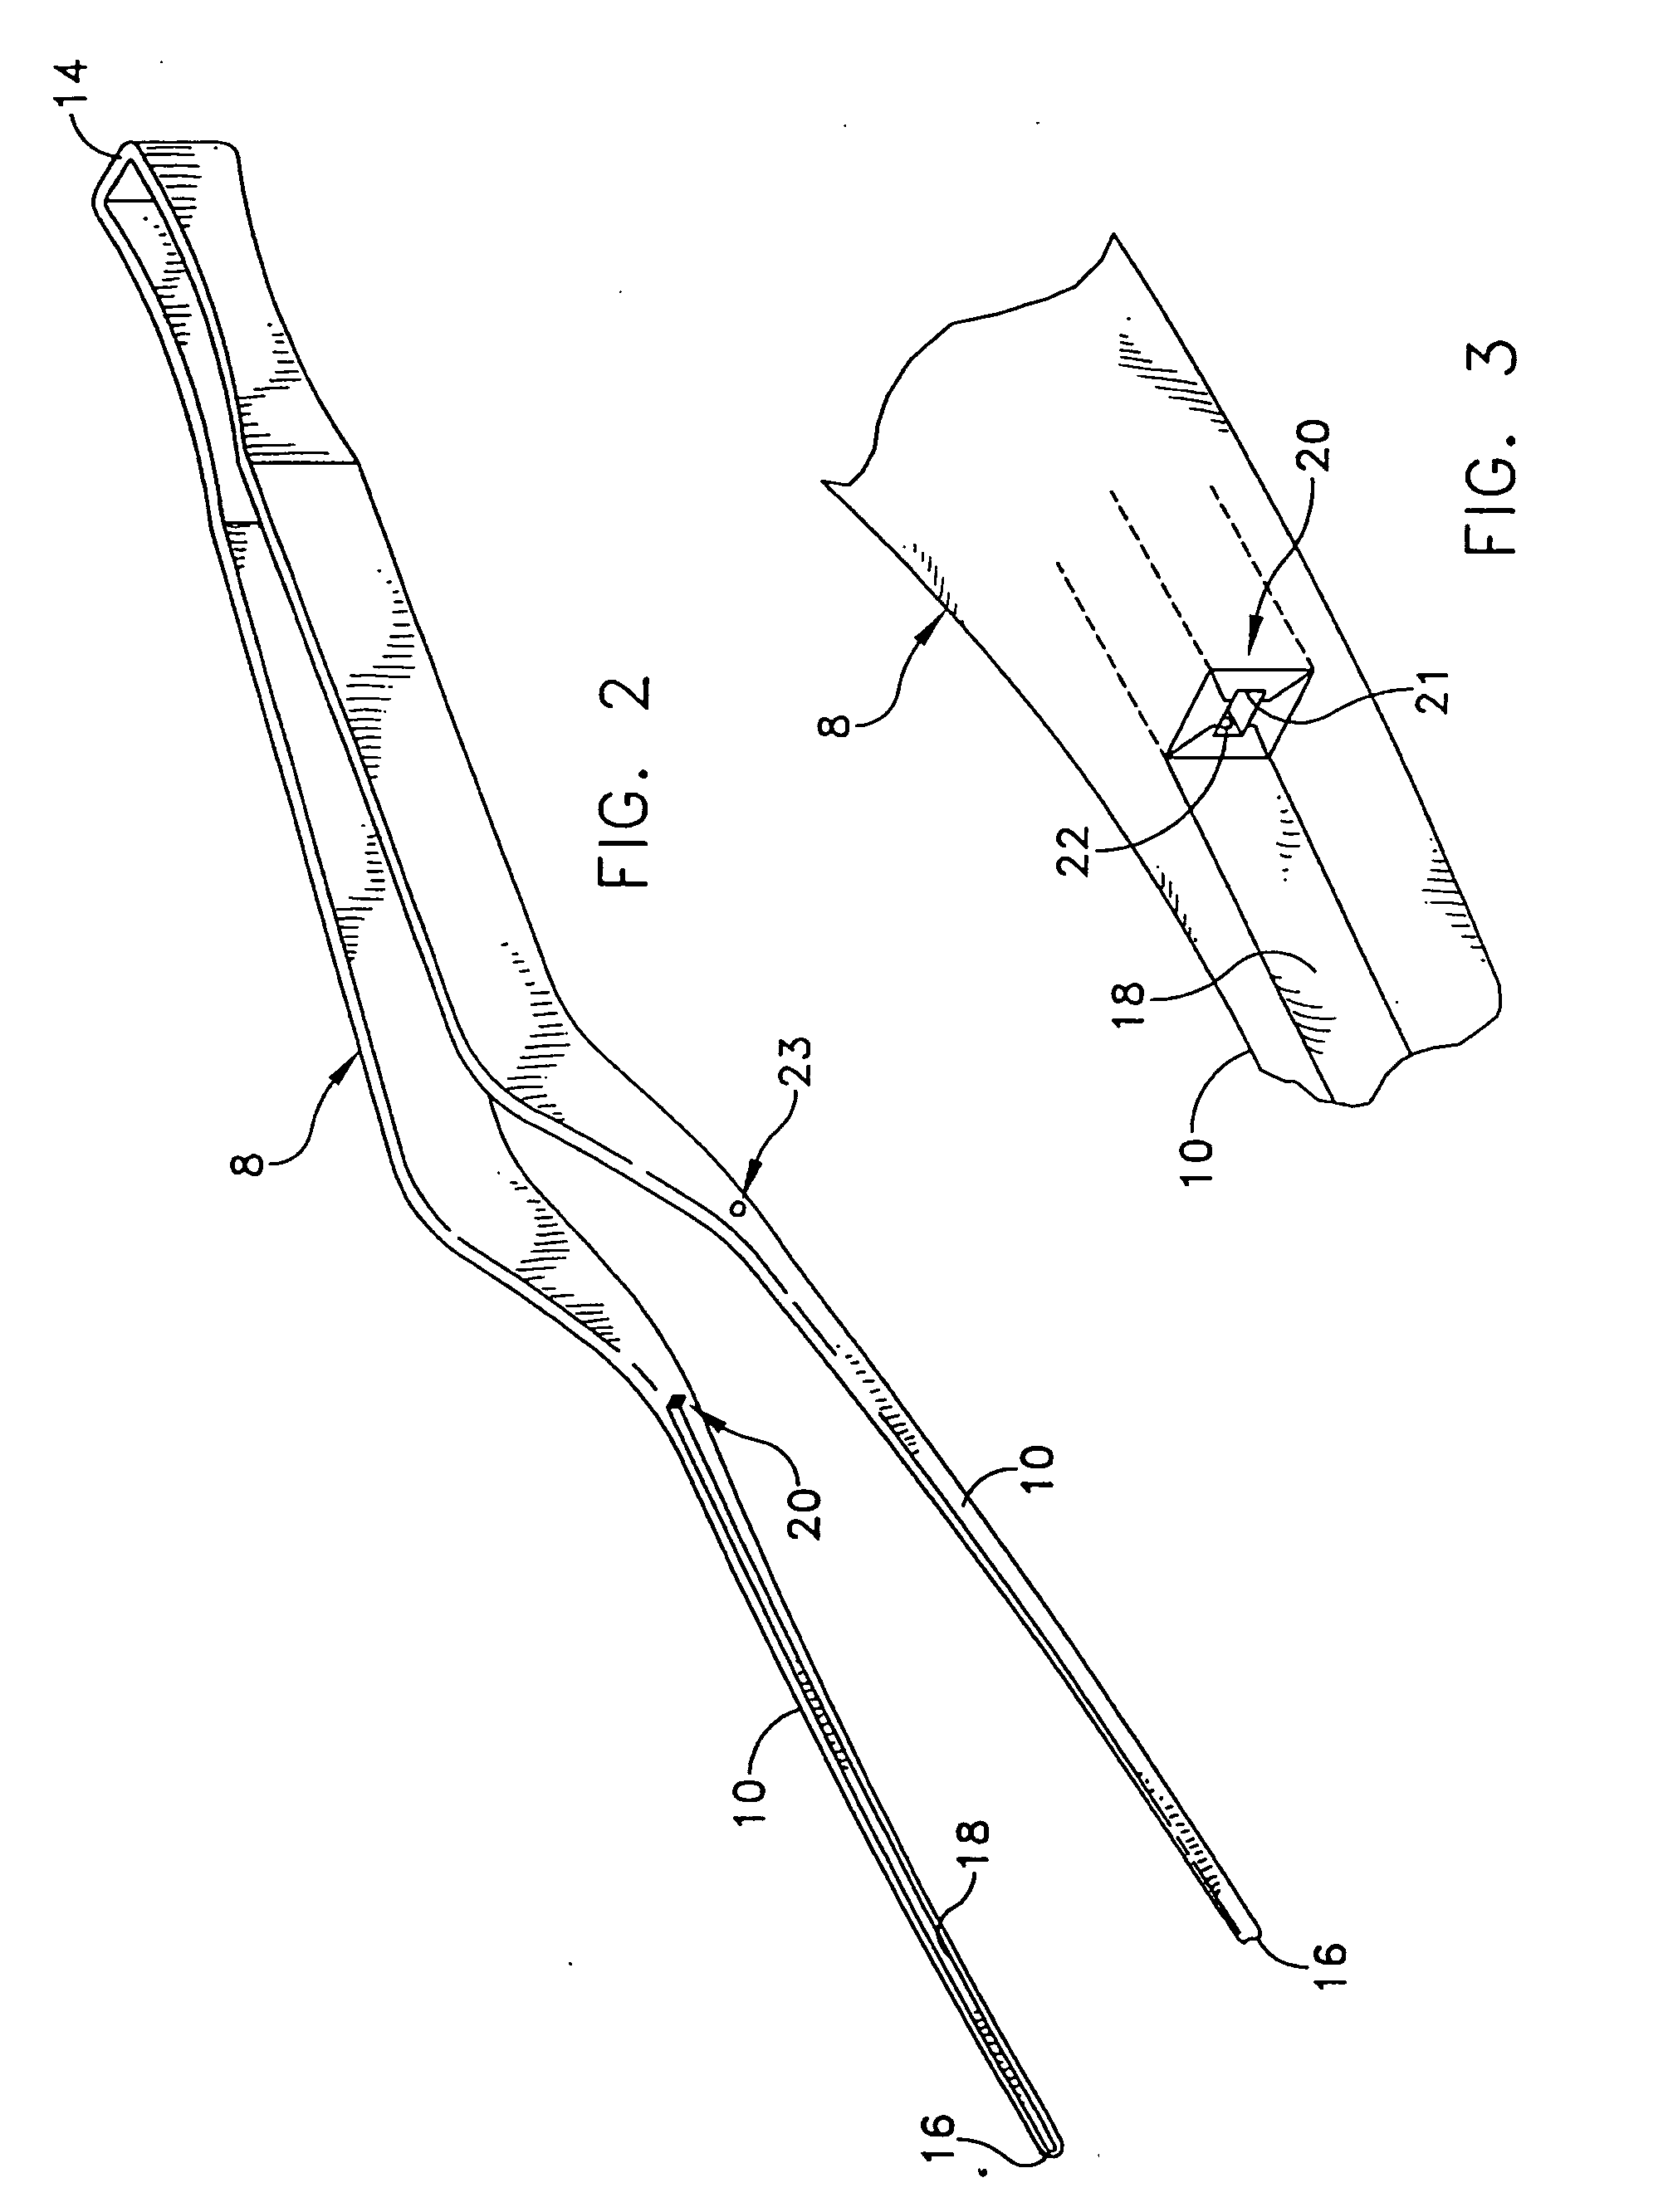 Heat pipe for cautery surgical instrument